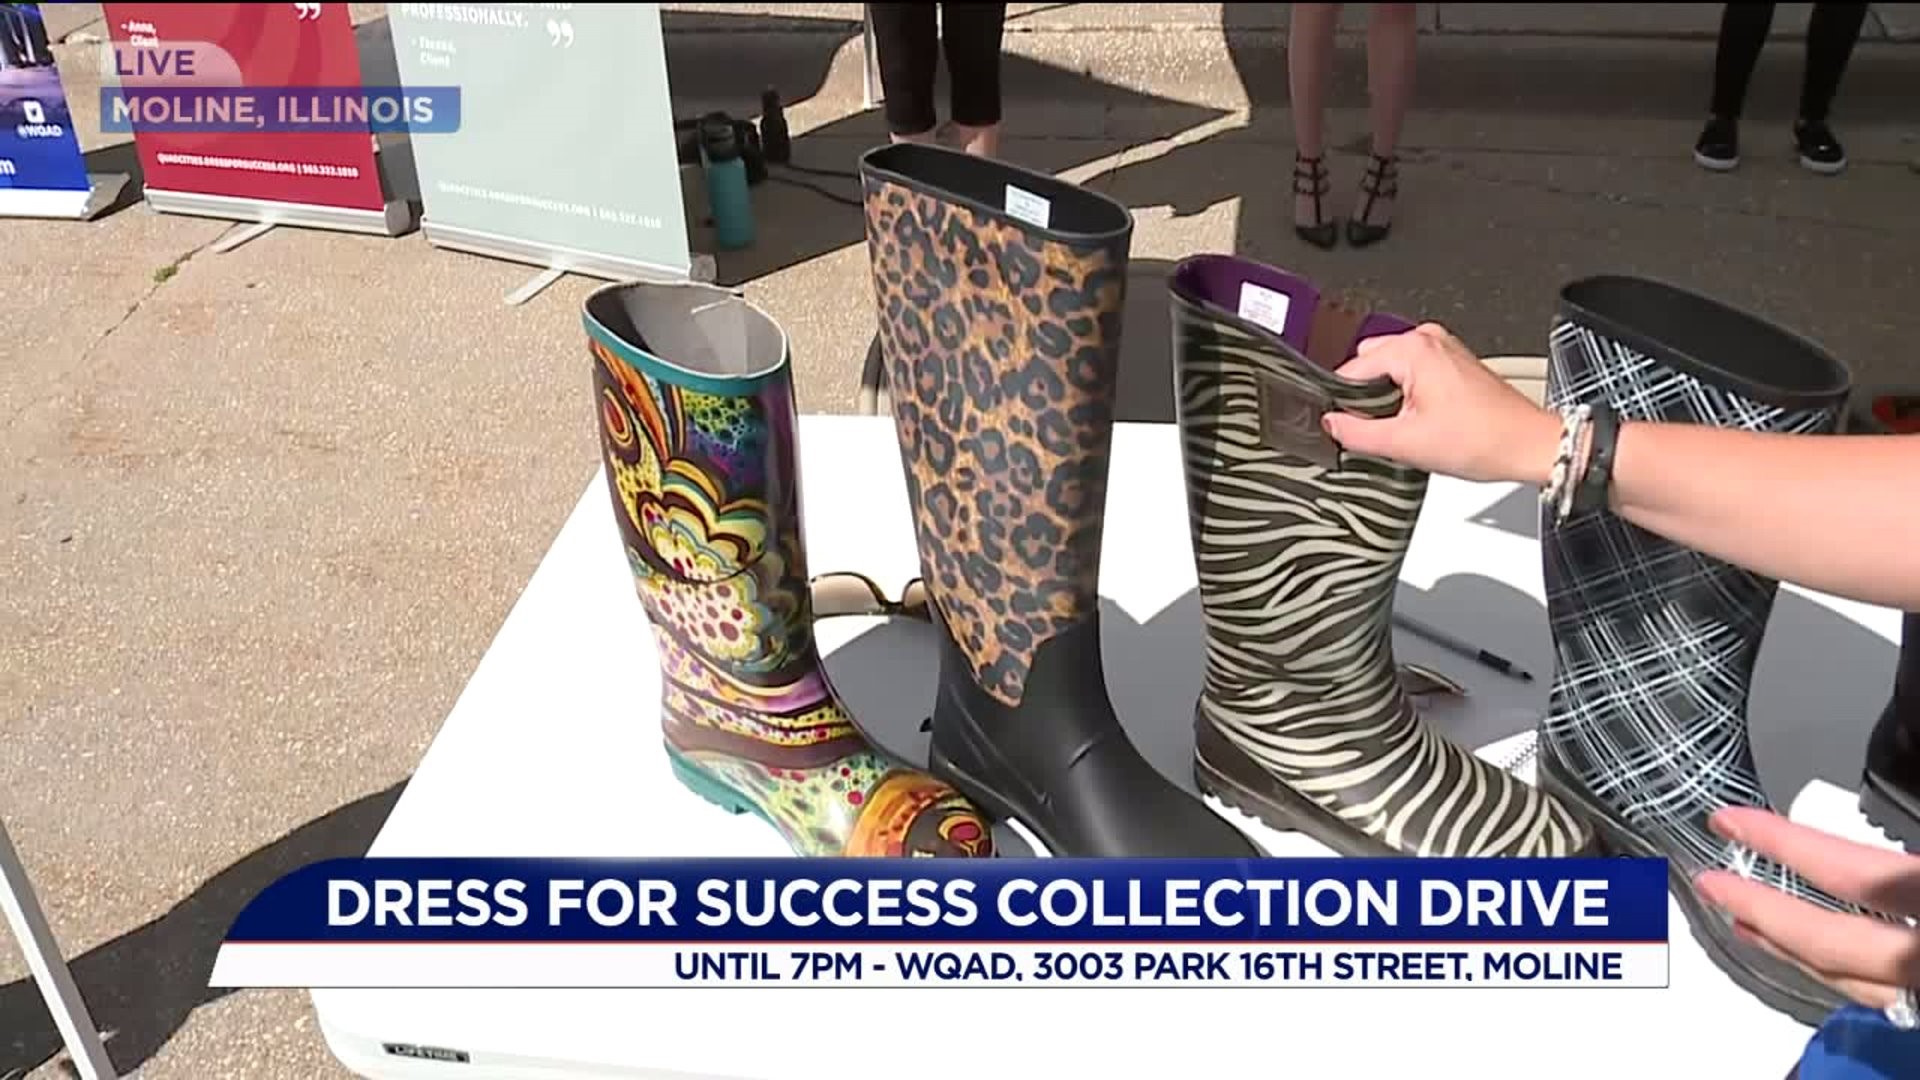 Help Us Fill These Flood Boots With Donations for Dress for Success